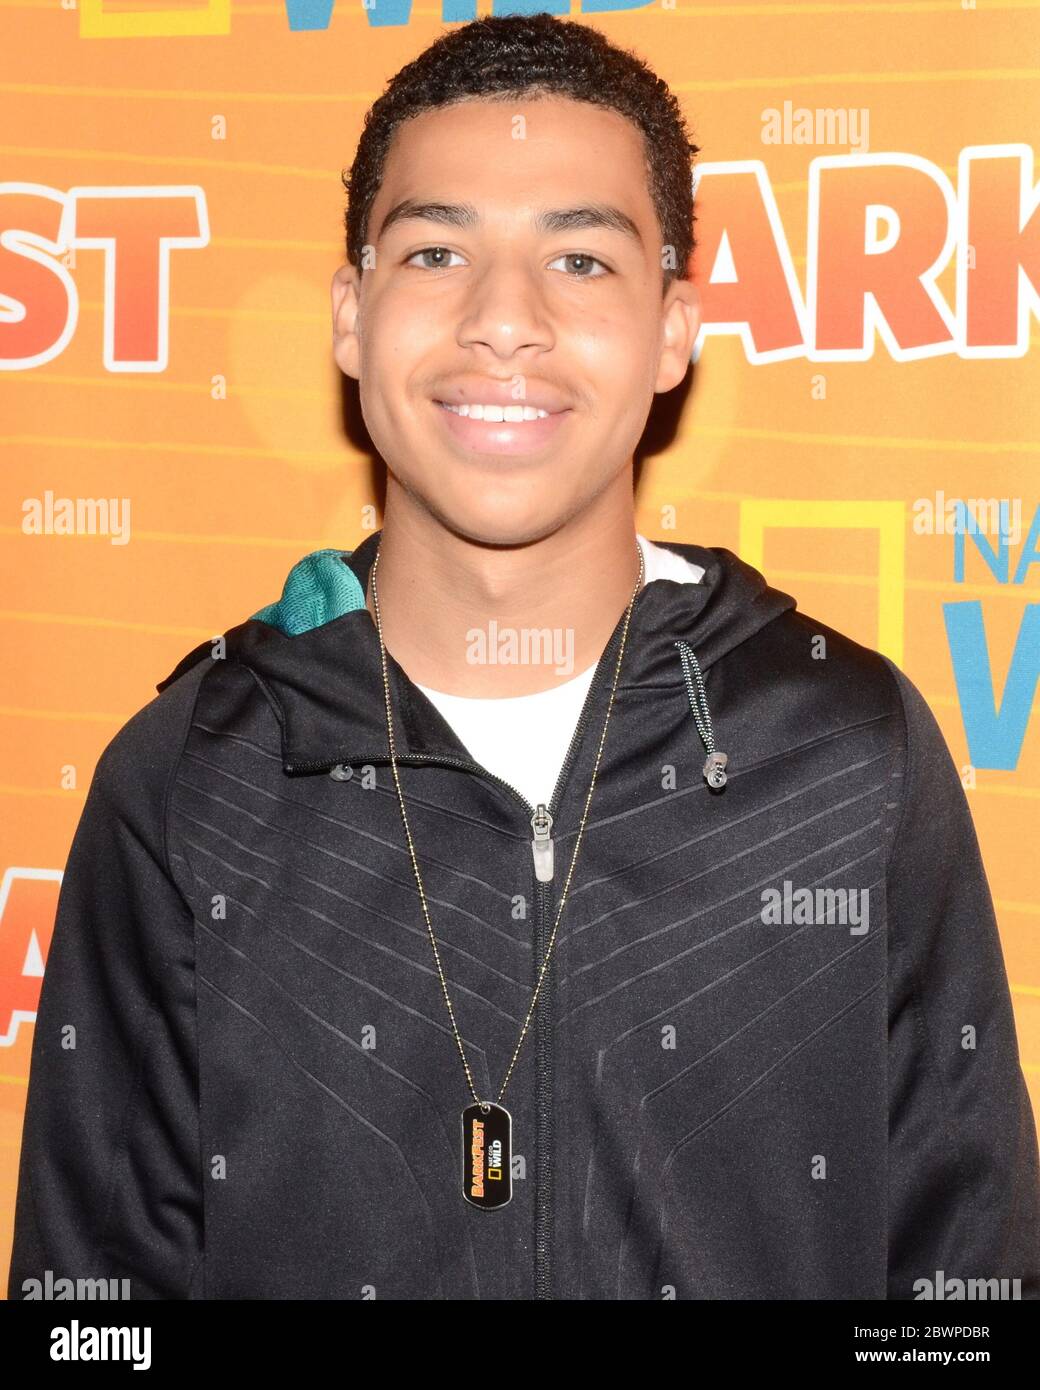 April 9, 2016, West Hollywood, California, USA: Marcus Scribner attends Nat Geo WILD 2nd Annual Barkfest at Palihouse Hotel on April 9, 2016 in West Hollywood, California. (Credit Image: © Billy Bennight/ZUMA Wire) Stock Photo